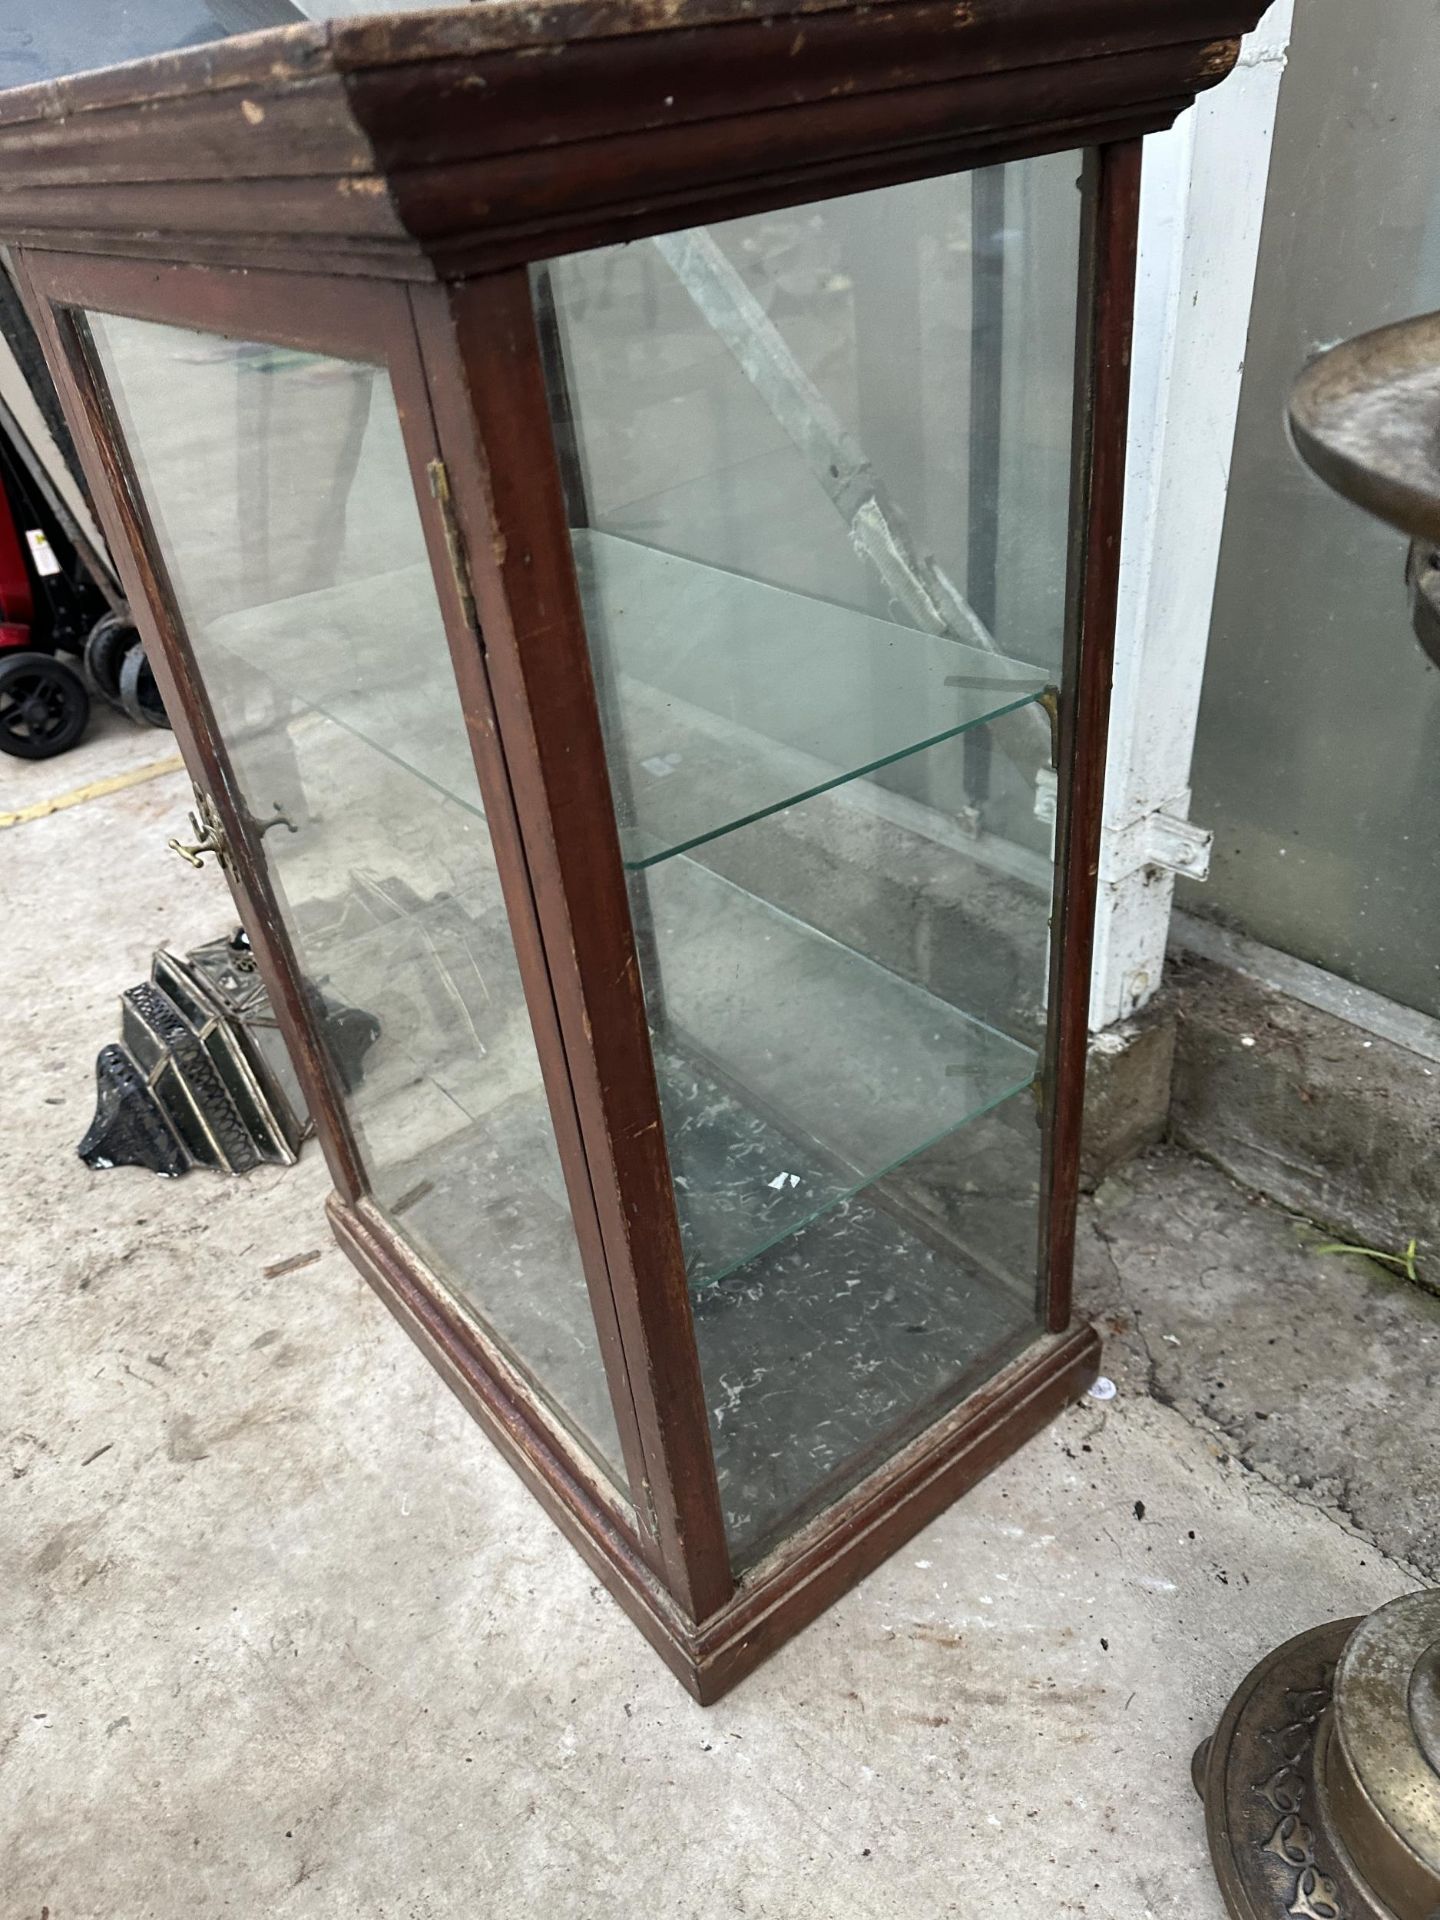 AN EARLY 20TH CENTURY OAK AND GLASS SHOP DISPLAY CABINET - Image 4 of 4